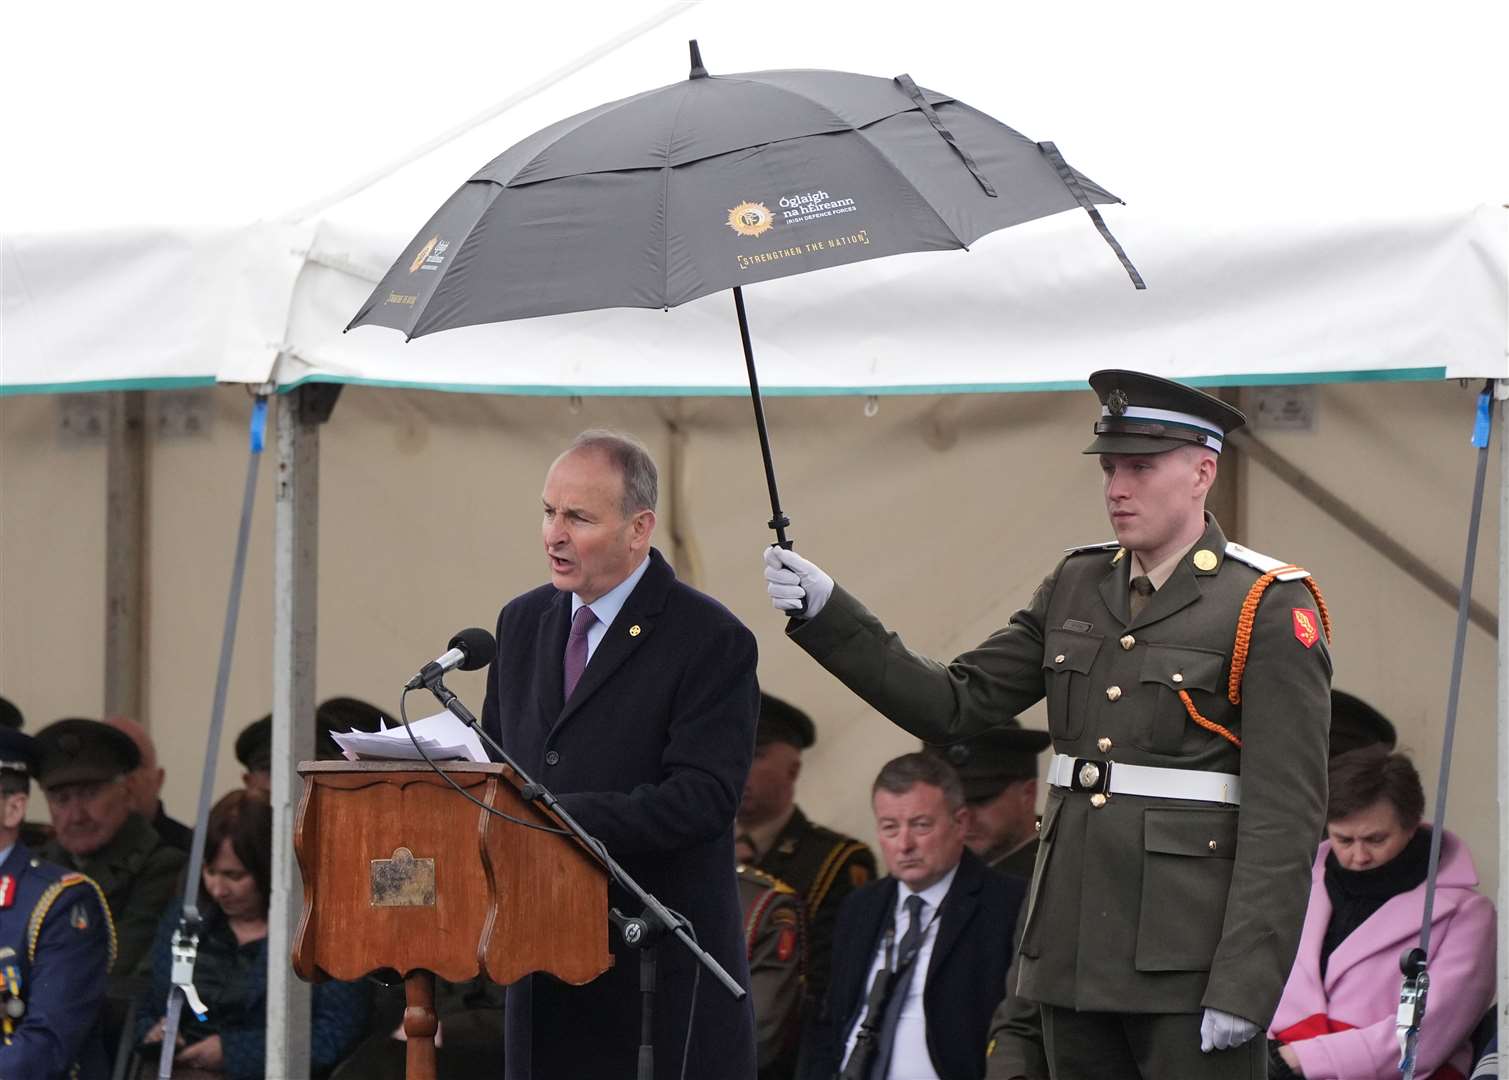 Tanaiste Micheal Martin speaks during the commissioning ceremony of the 99th cadet class at the Defence Forces Training Centre in Curragh, Co Kildare (Niall Carson/PA)